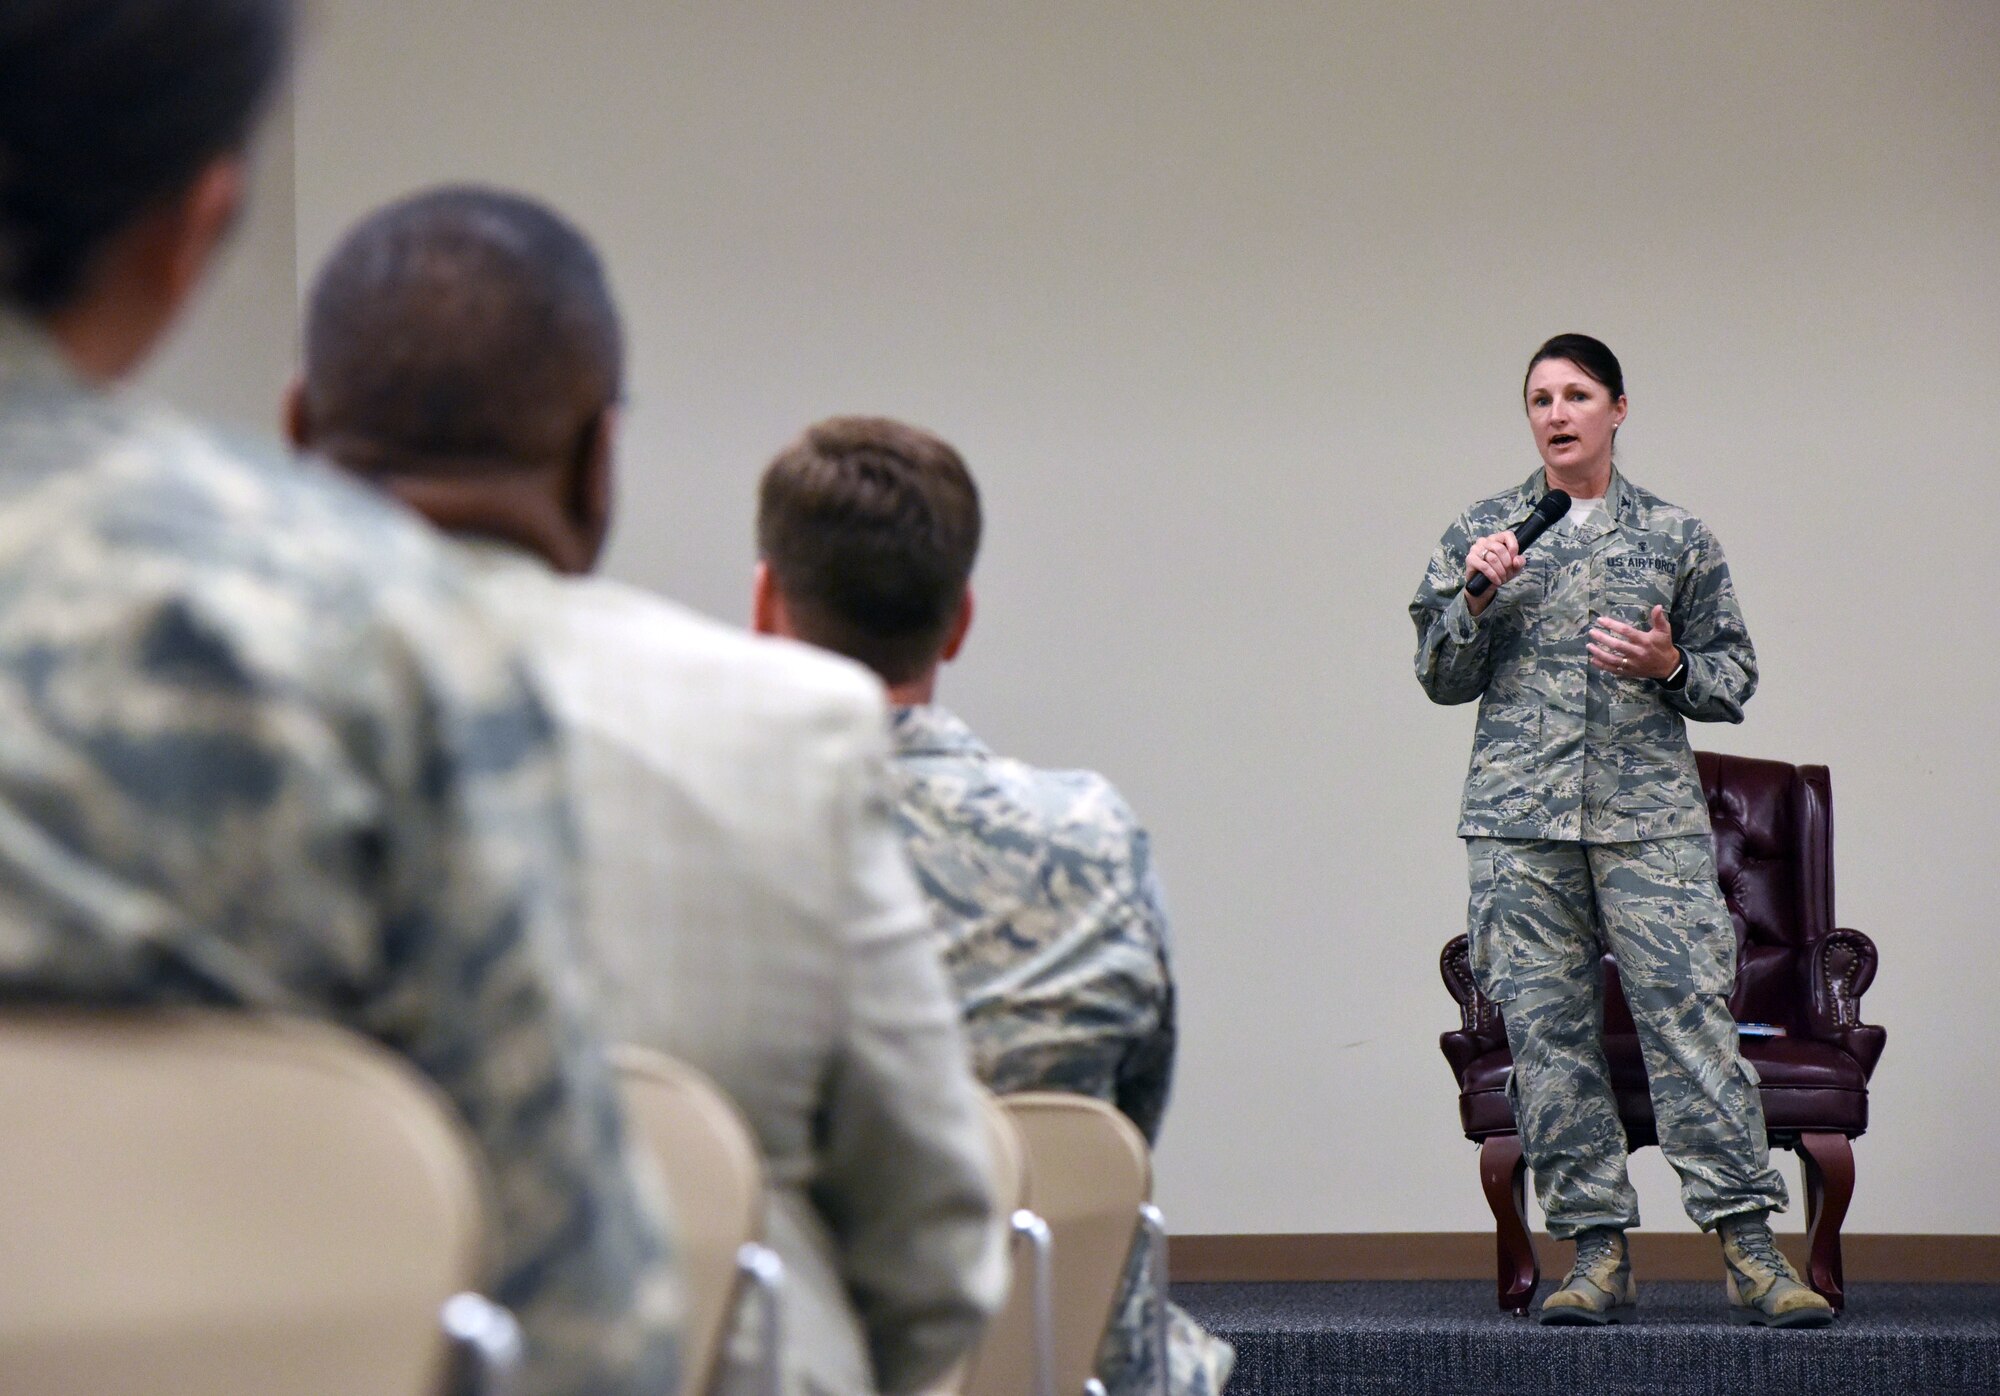 U.S. Air Force Col. Beatrice Dolihite, 81st Medical Group commander, delivers remarks during the 81st Training Wing Women's Equality Day Observance at the Roberts Consolidated Aircraft Maintenance Facility at Keesler Air Force Base, Mississippi, Aug. 21, 2018. Women�s Equality Day commemorates the passage of the 19th Amendment to the U.S. Constitution, granting the right for women to vote. The amendment was first introduced in 1878. (U.S. Air Force photo by Kemberly Groue)